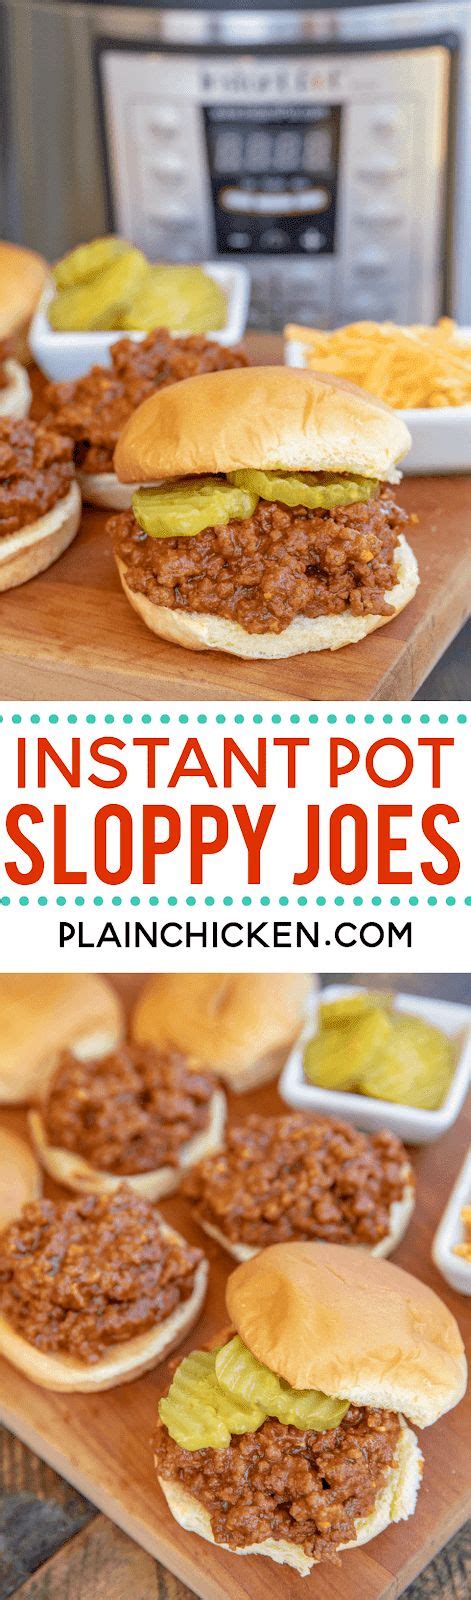 Instant Pot Sloppy Joes Seriously Delicious Hands Down The Best